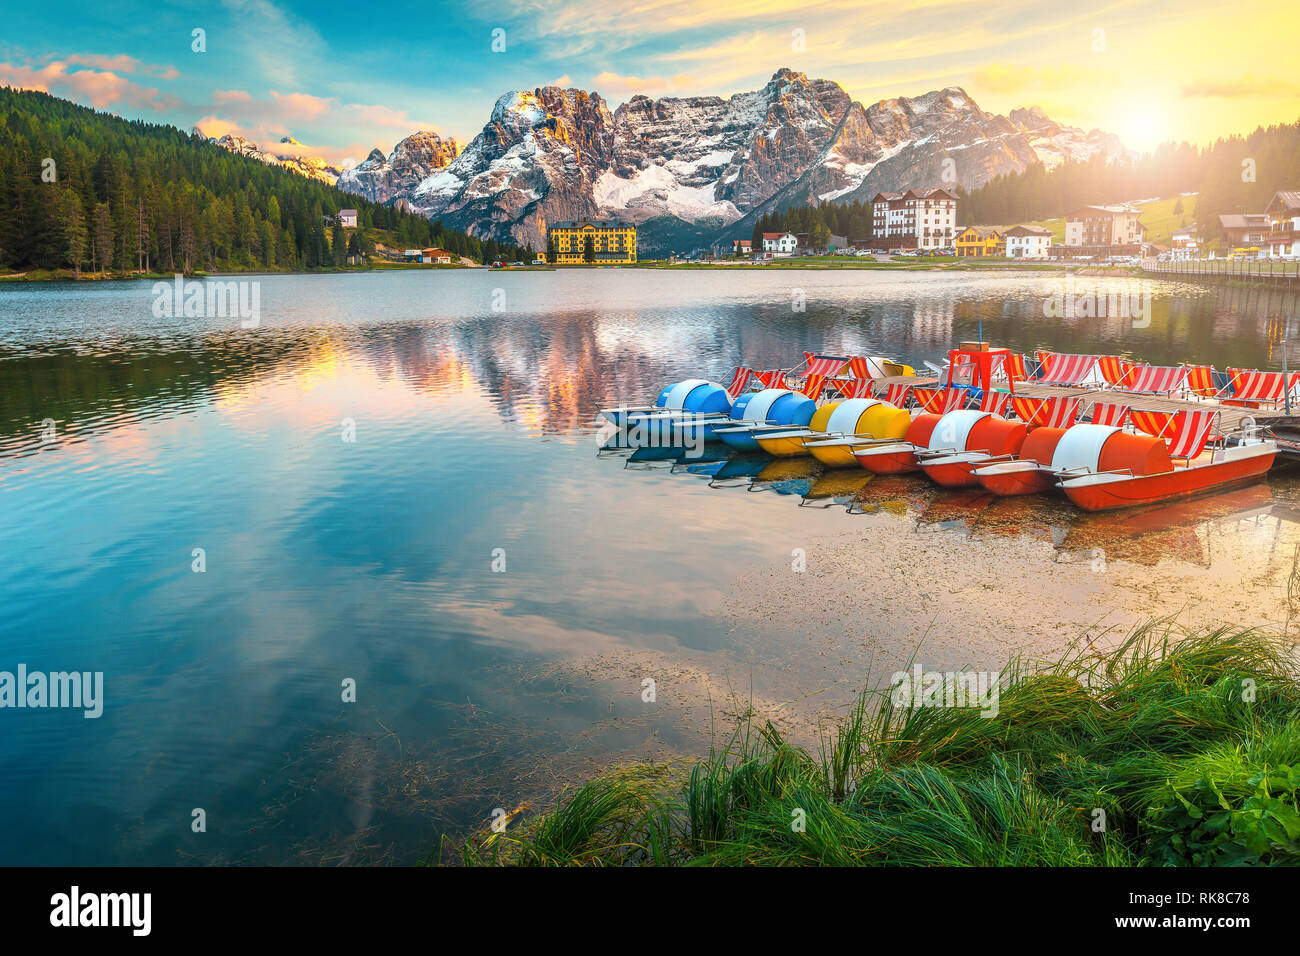 Breathtaking sunset and famous alpine Misurina lake. High Sorapis mountain group in background and spectacular Misurina lake with colorful boats at su Stock Photo